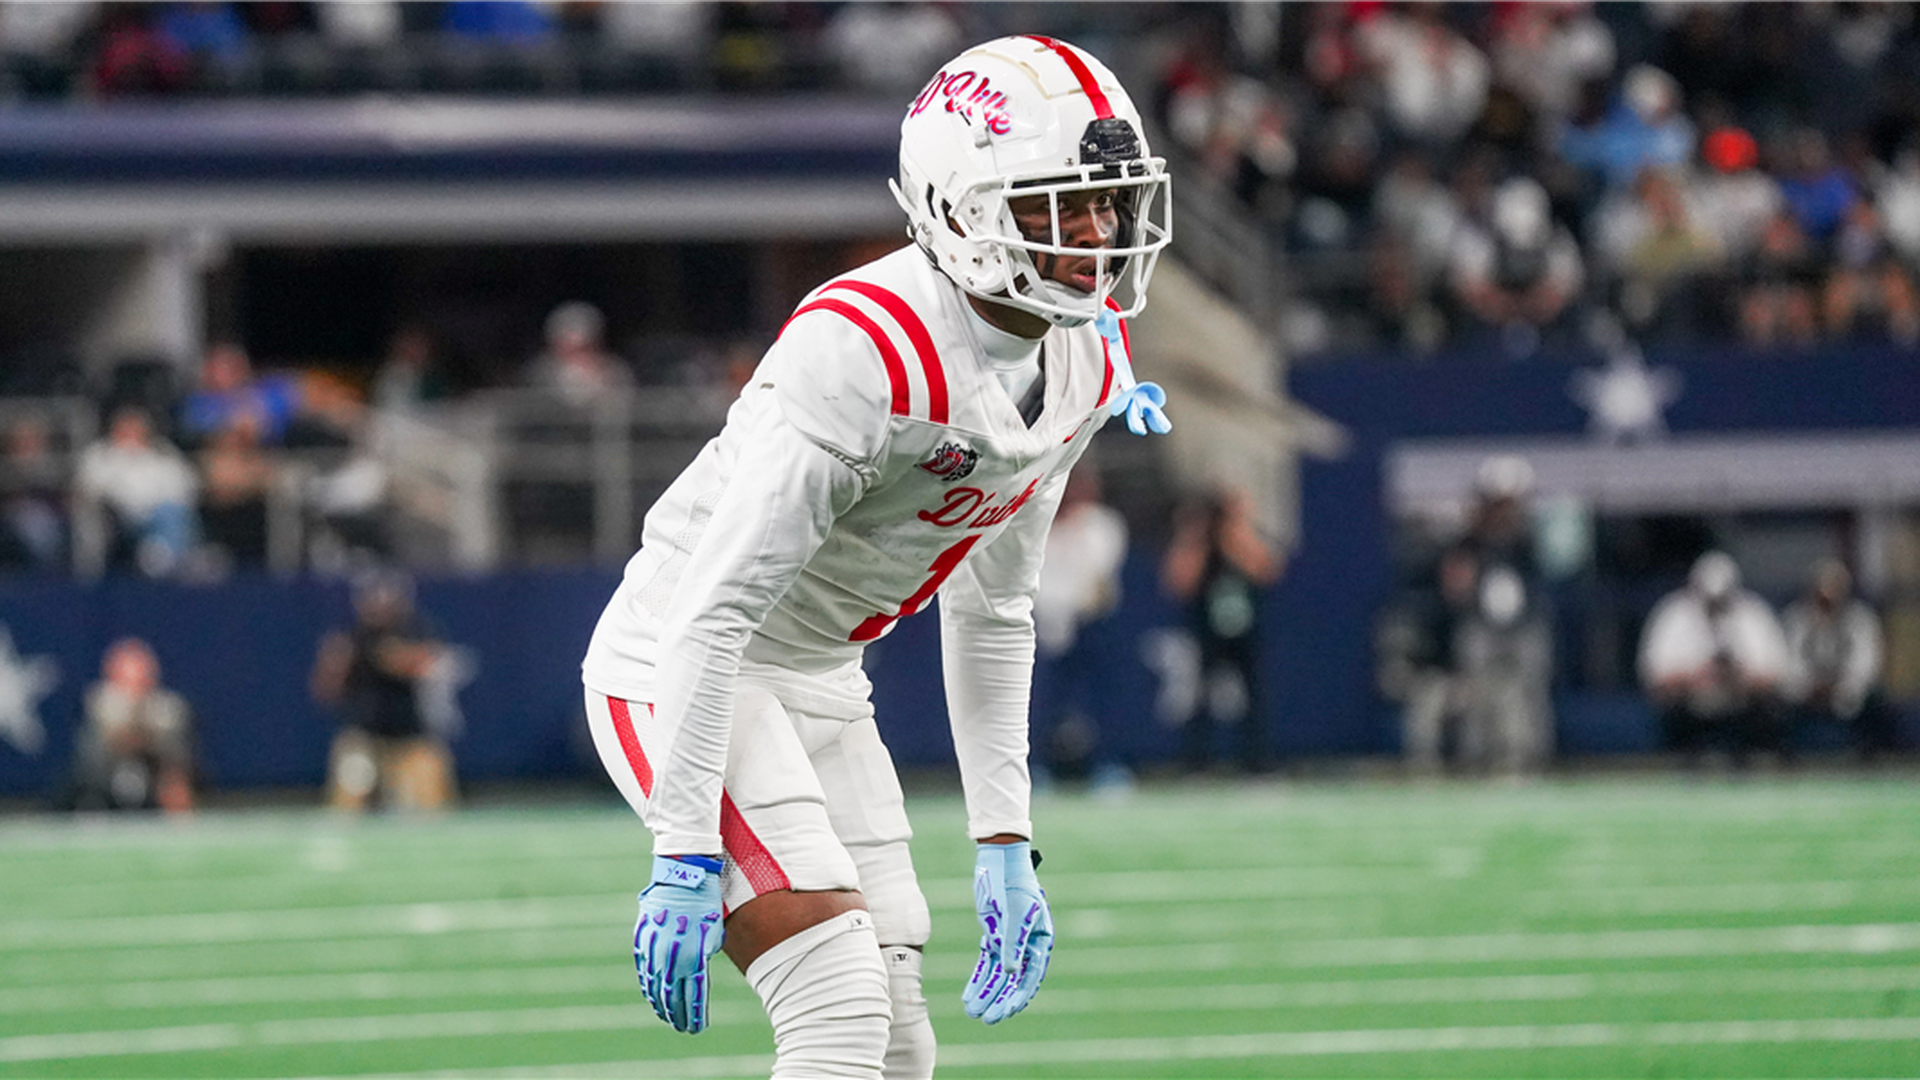 ohio state will welcome nation’s top receiver to campus for spring game